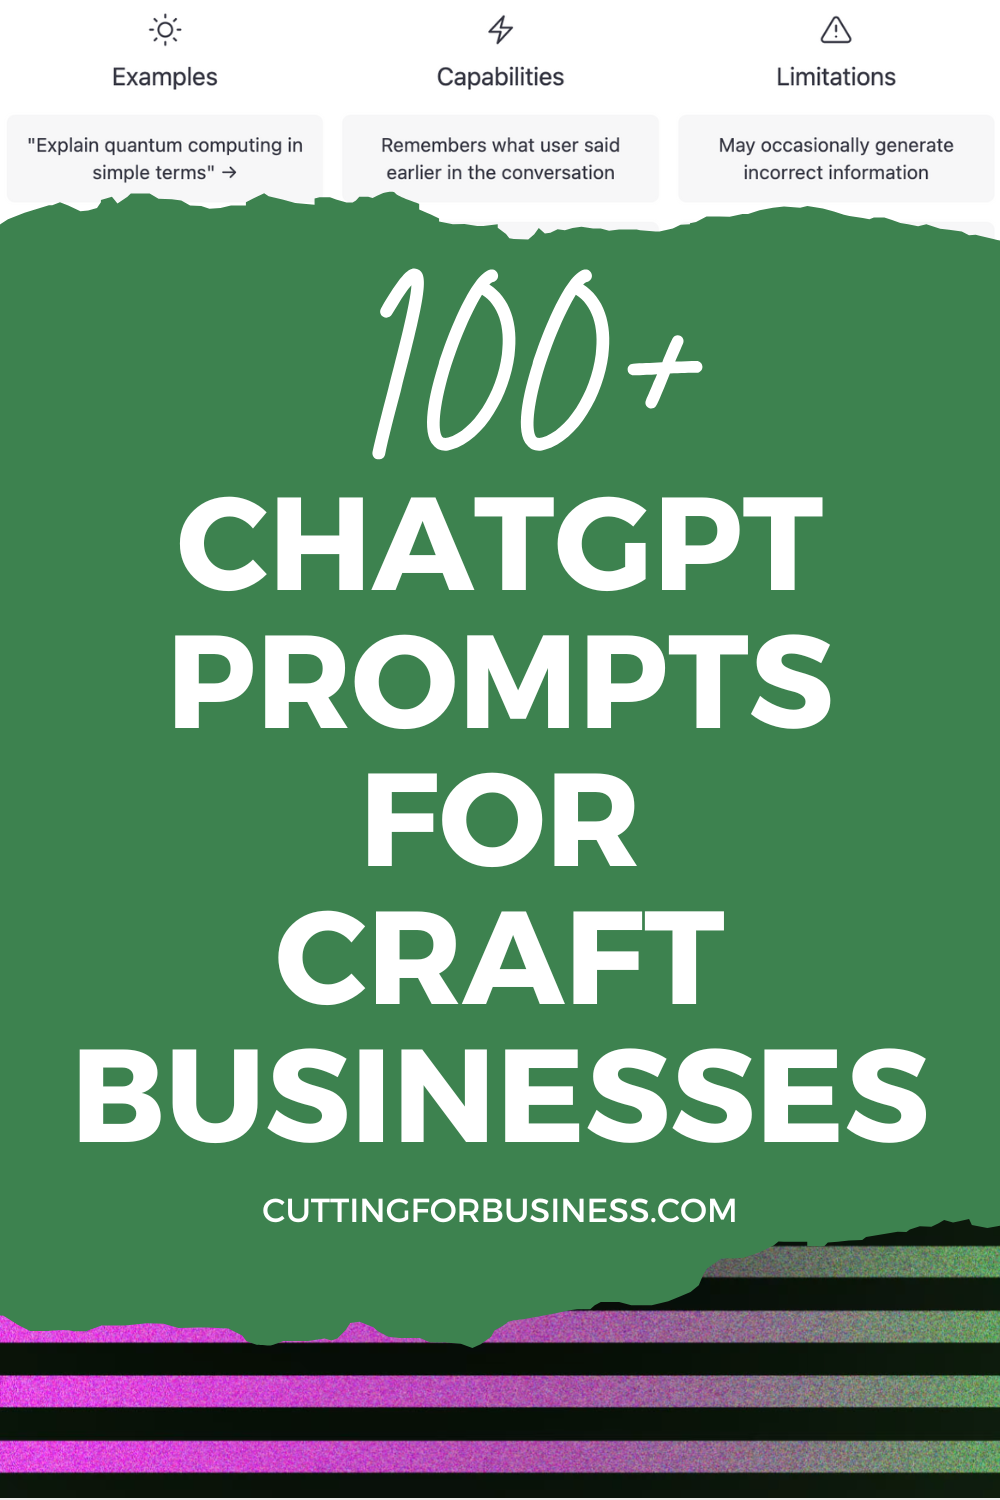 100+ ChatGPT Prompts for Craft Businesses - by cuttingforbusiness.com.